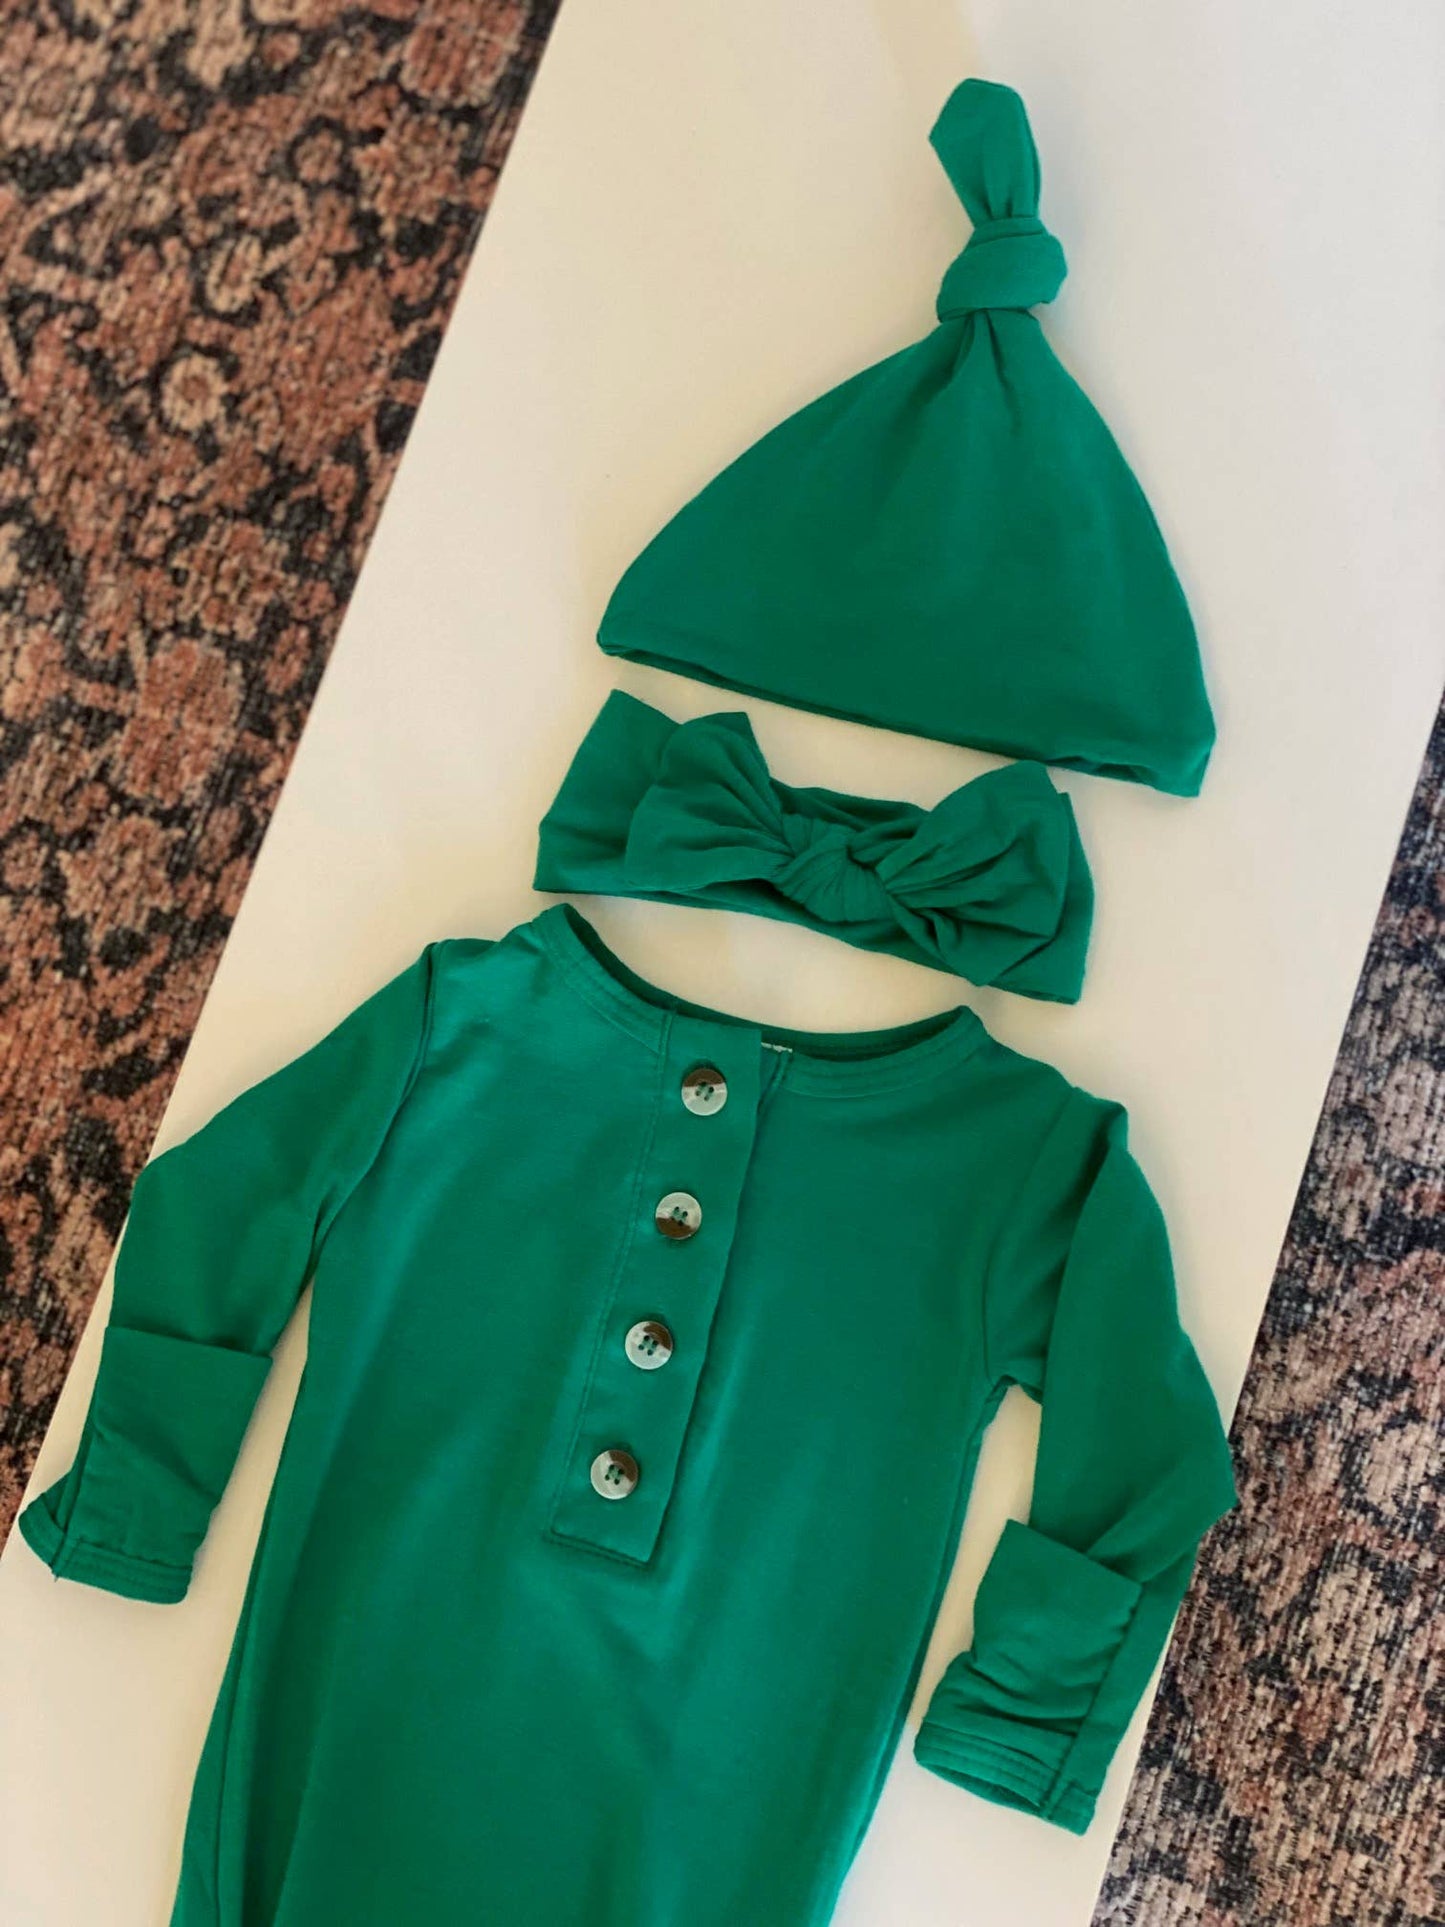 Knotted Baby Gown Set (Newborn - 3 mo) - Green